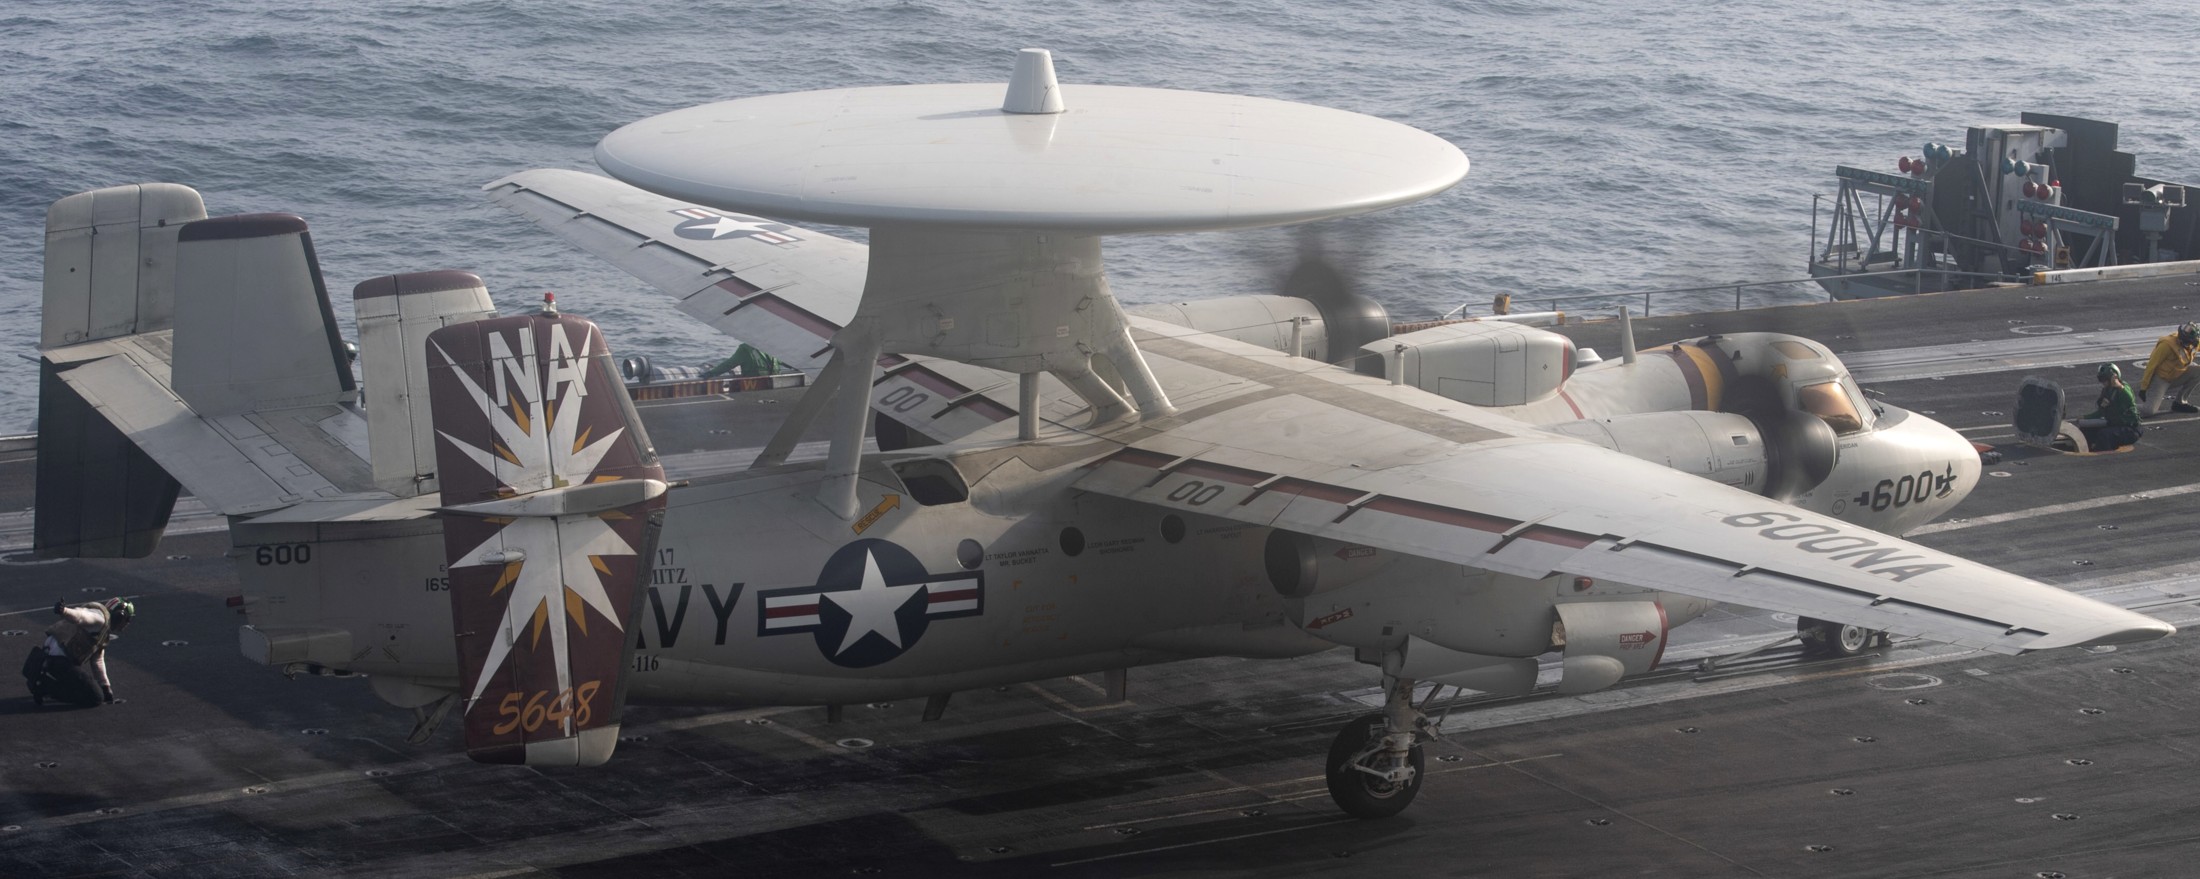 vaw-116 sun kings airborne command control squadron carrier early warning cvw-17 uss nimitz cvn-68 89